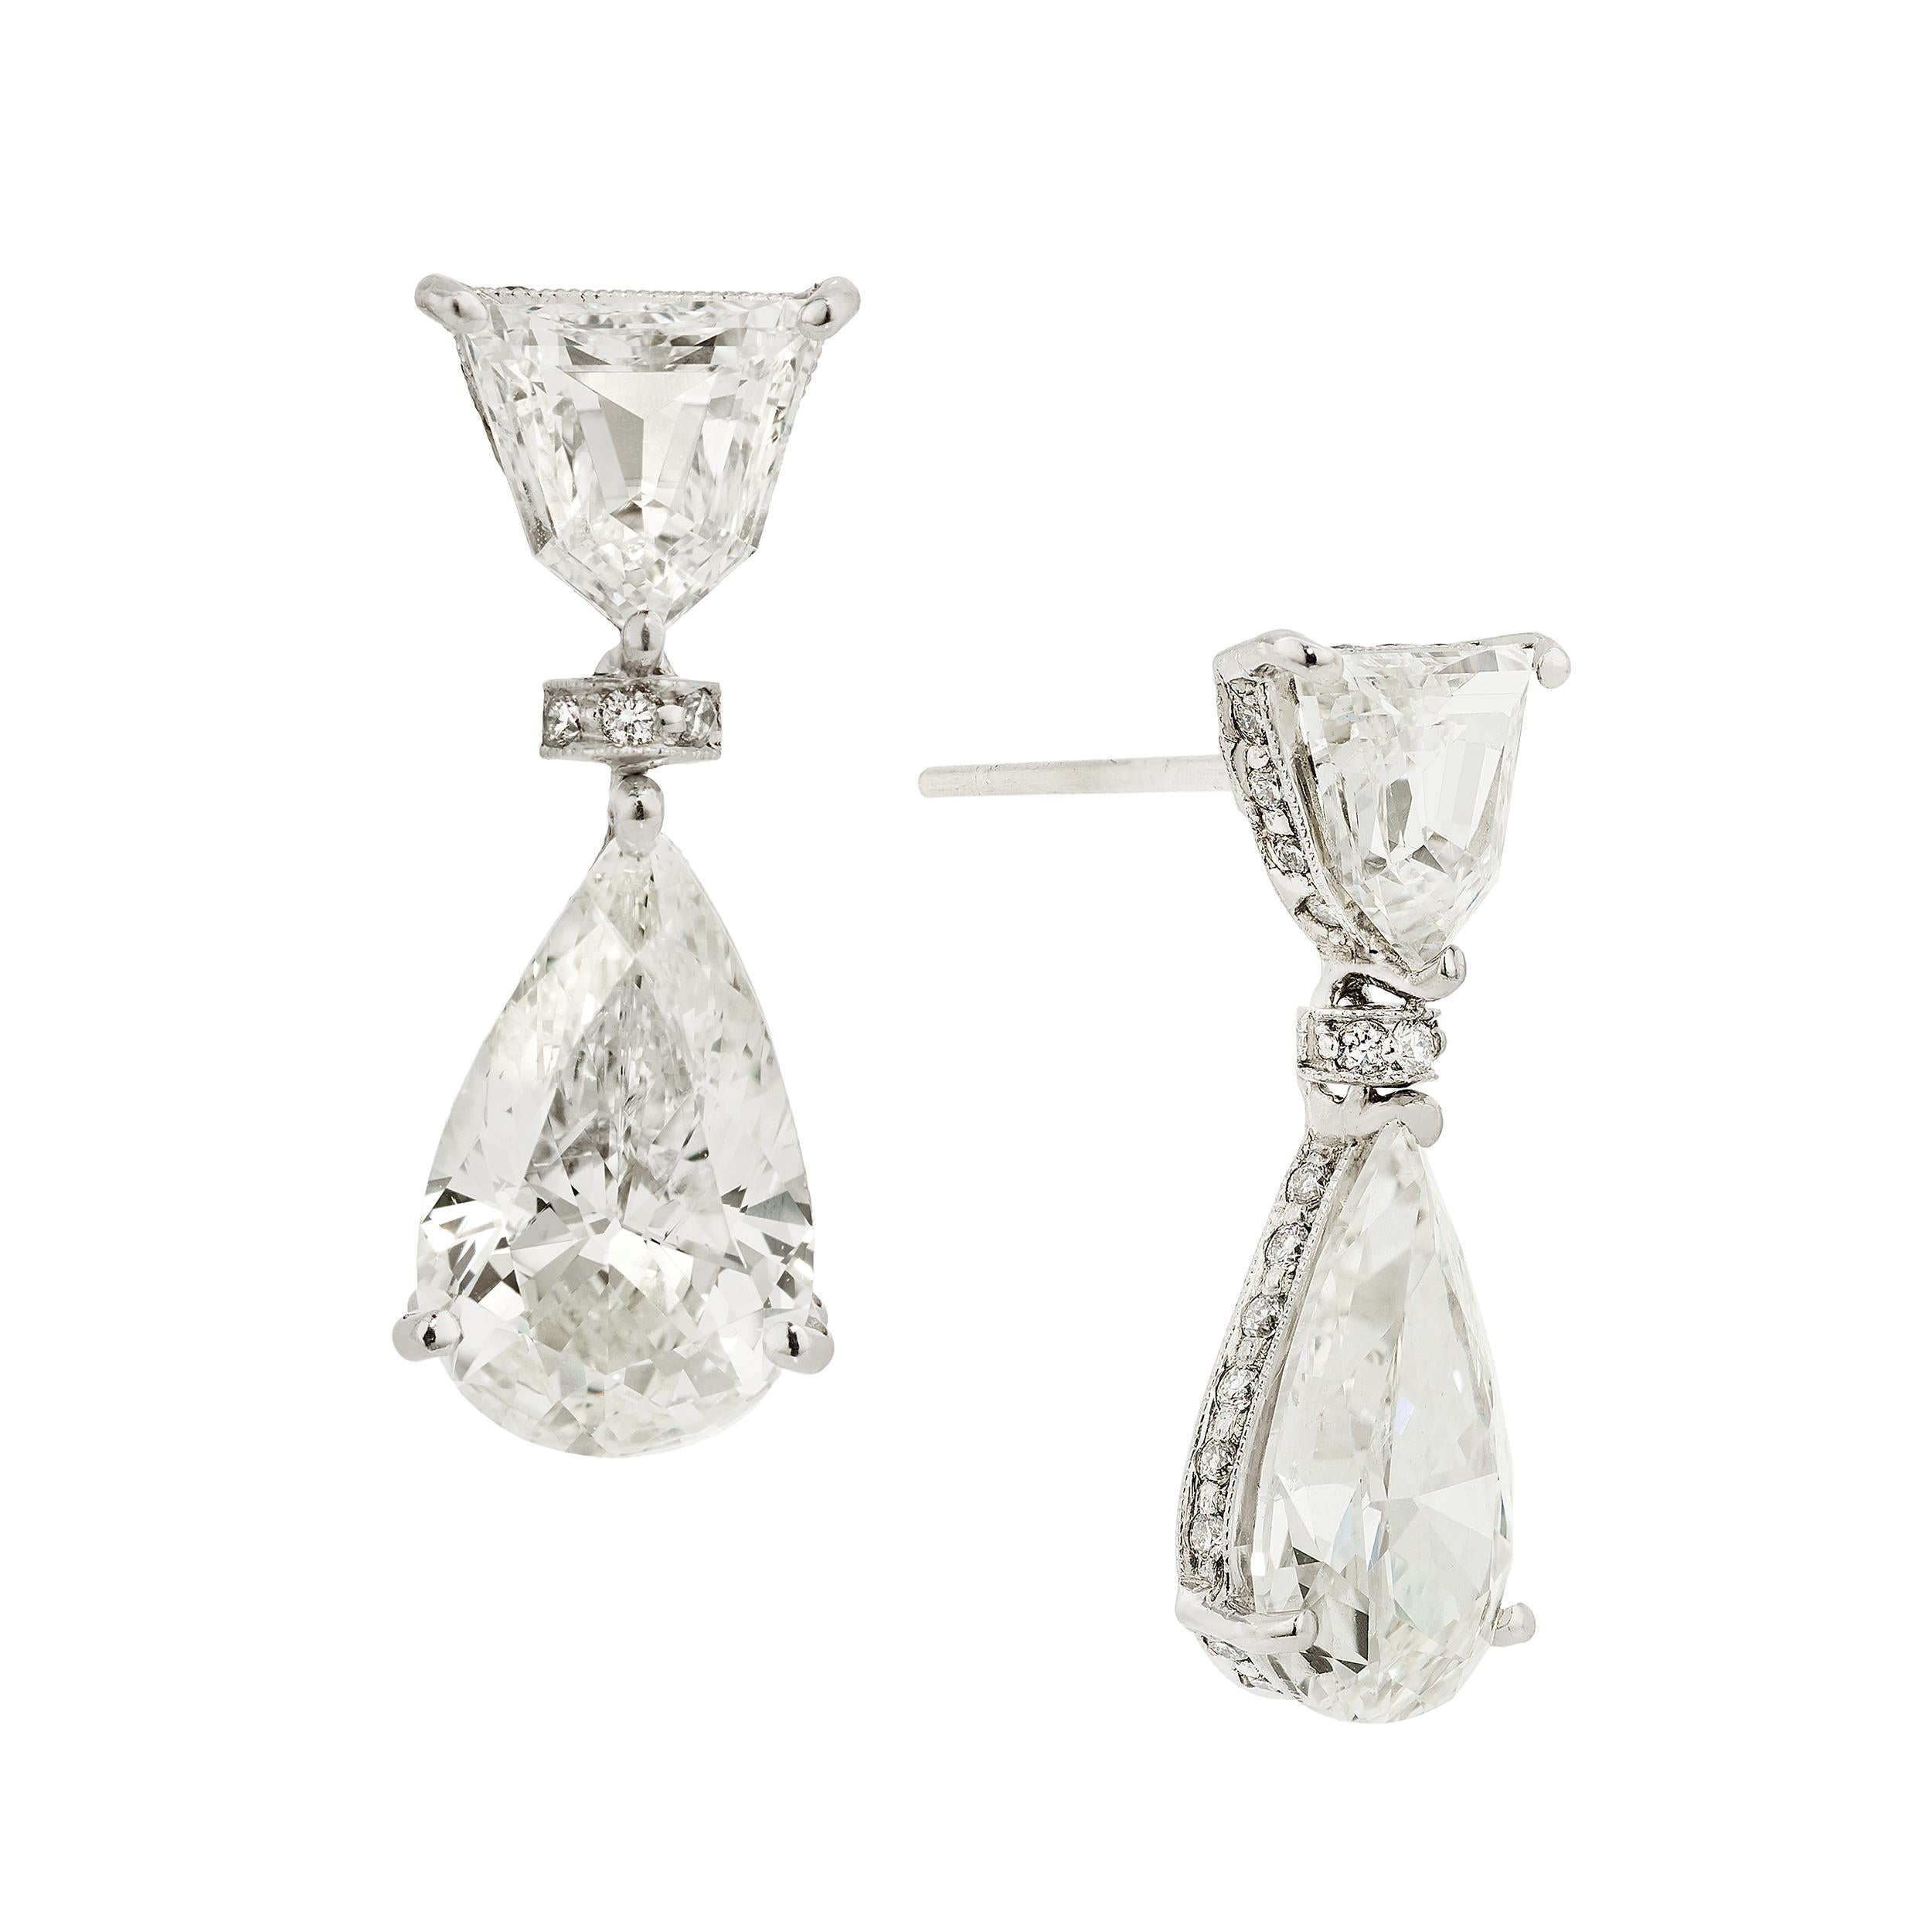 Simply stunning platinum and diamond earrings featuring a Shield-shaped Diamond set with 3 prongs with Pear-shaped Diamonds set with 3 prongs dangling beneath.  There are an additional 64 bead set round brilliant cut diamonds that are set into the